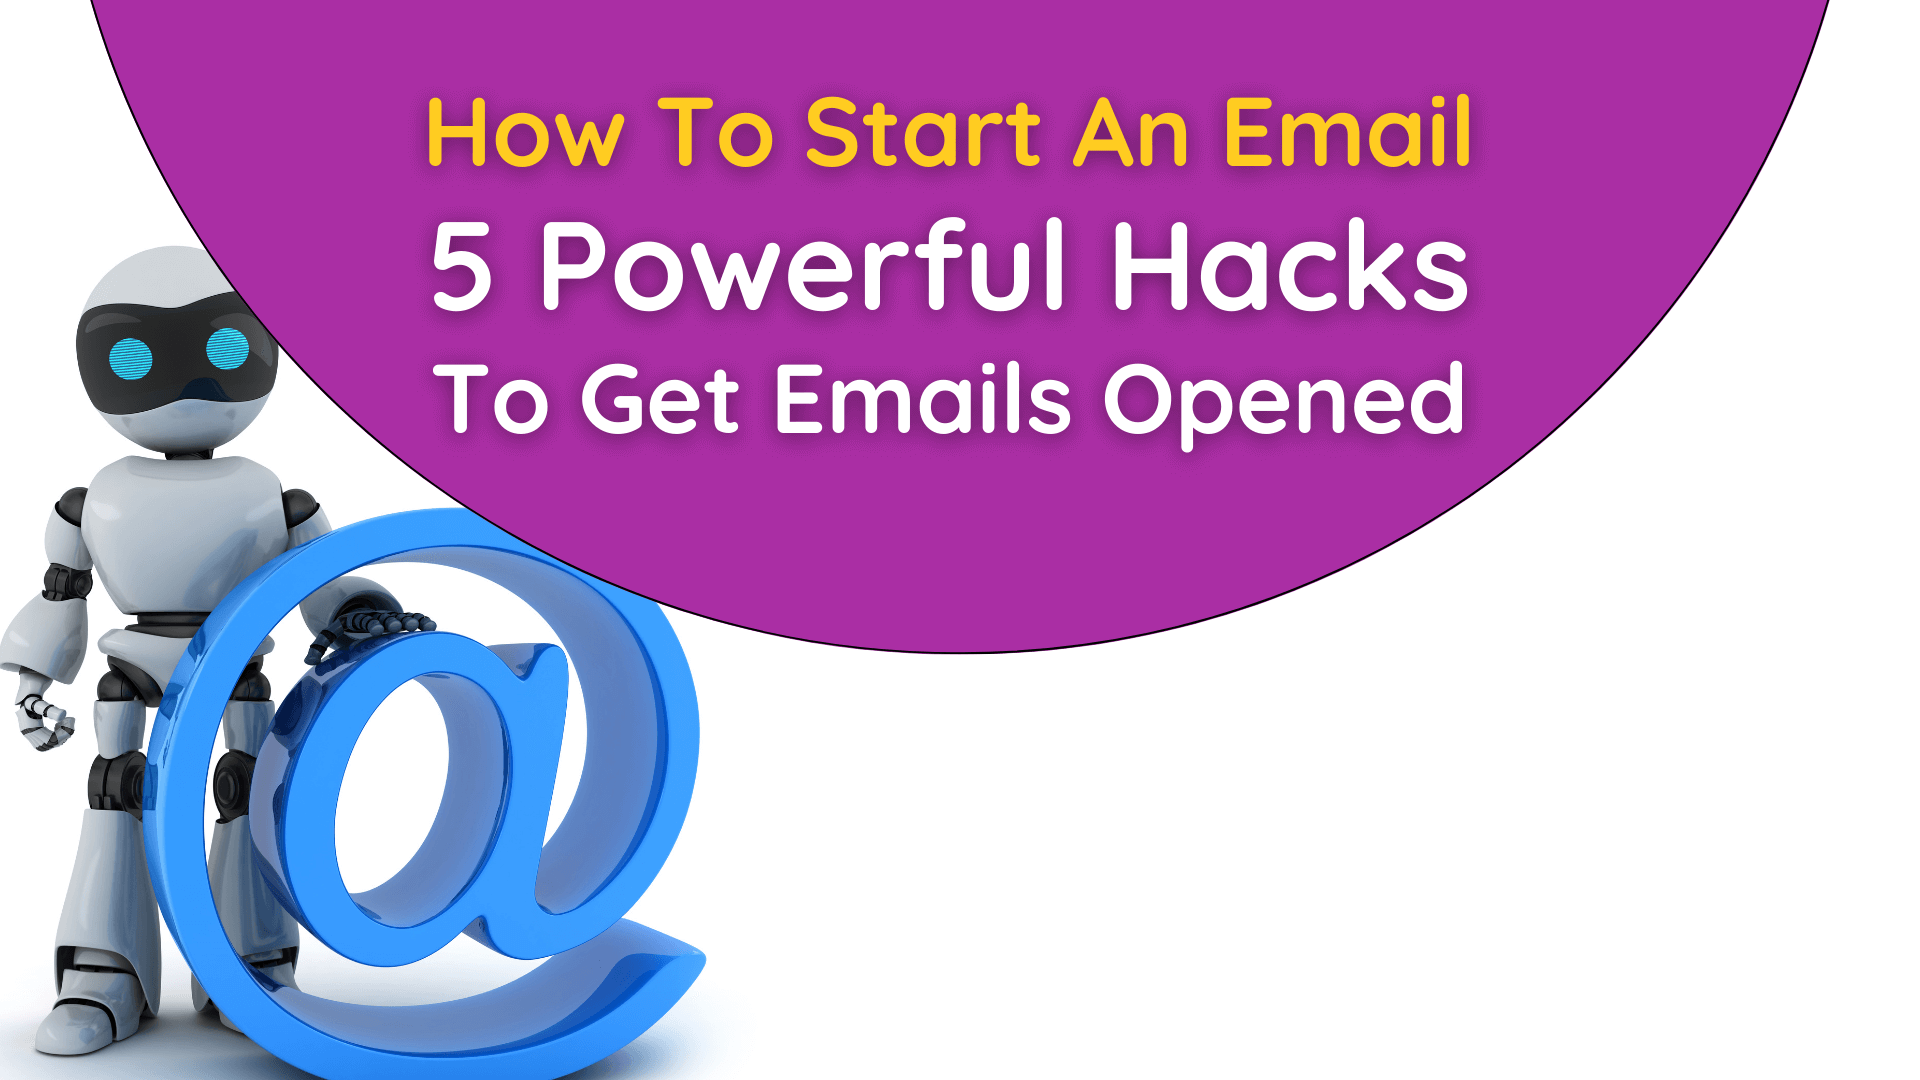 how to start an email